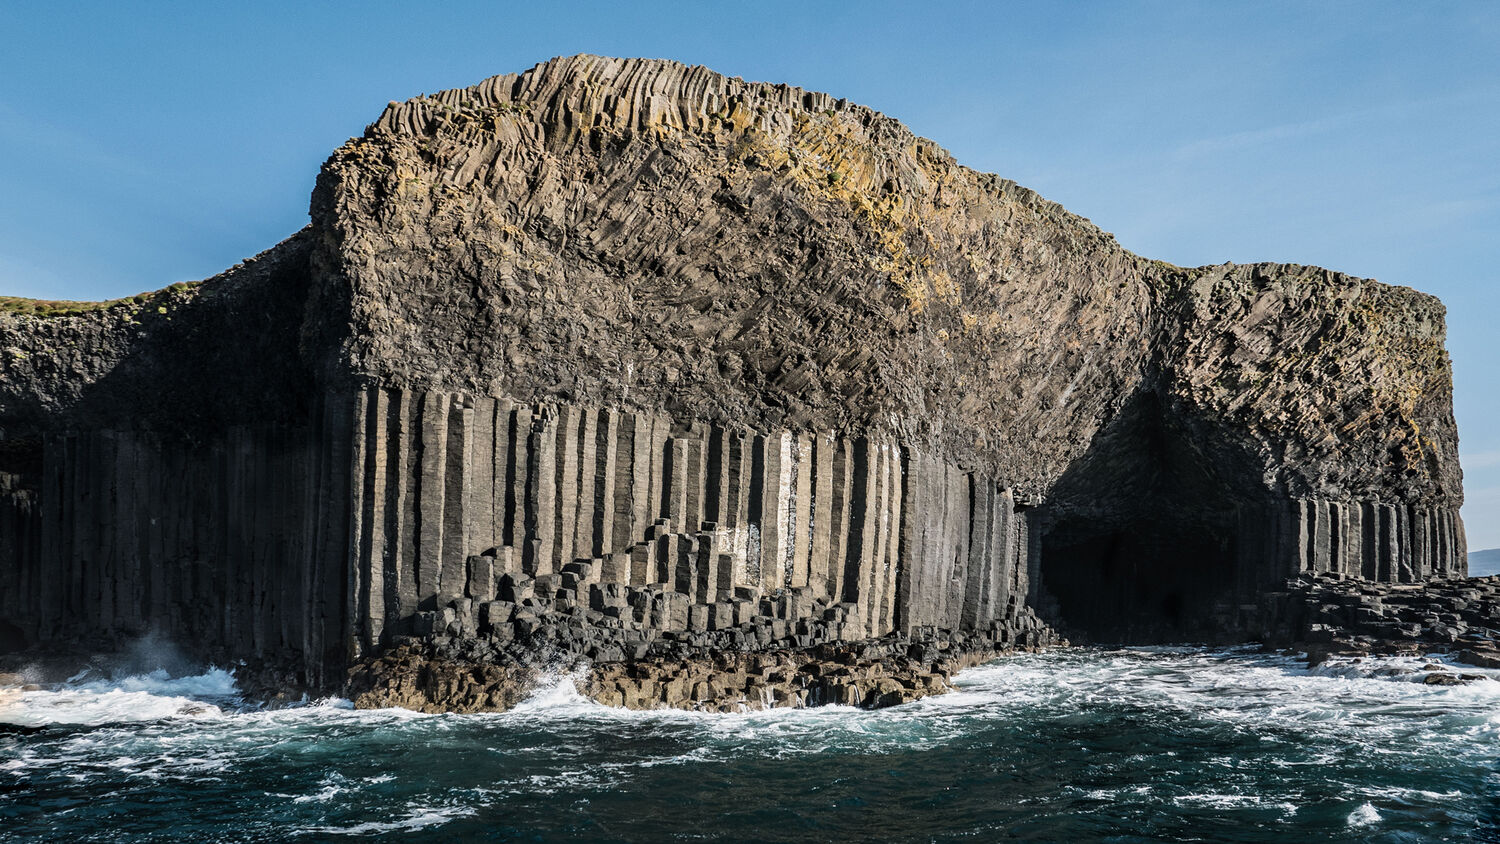 A view of a deep cave in a cliff, seen from the sea on a sunny day. The cliffs have remarkable basalt columns.